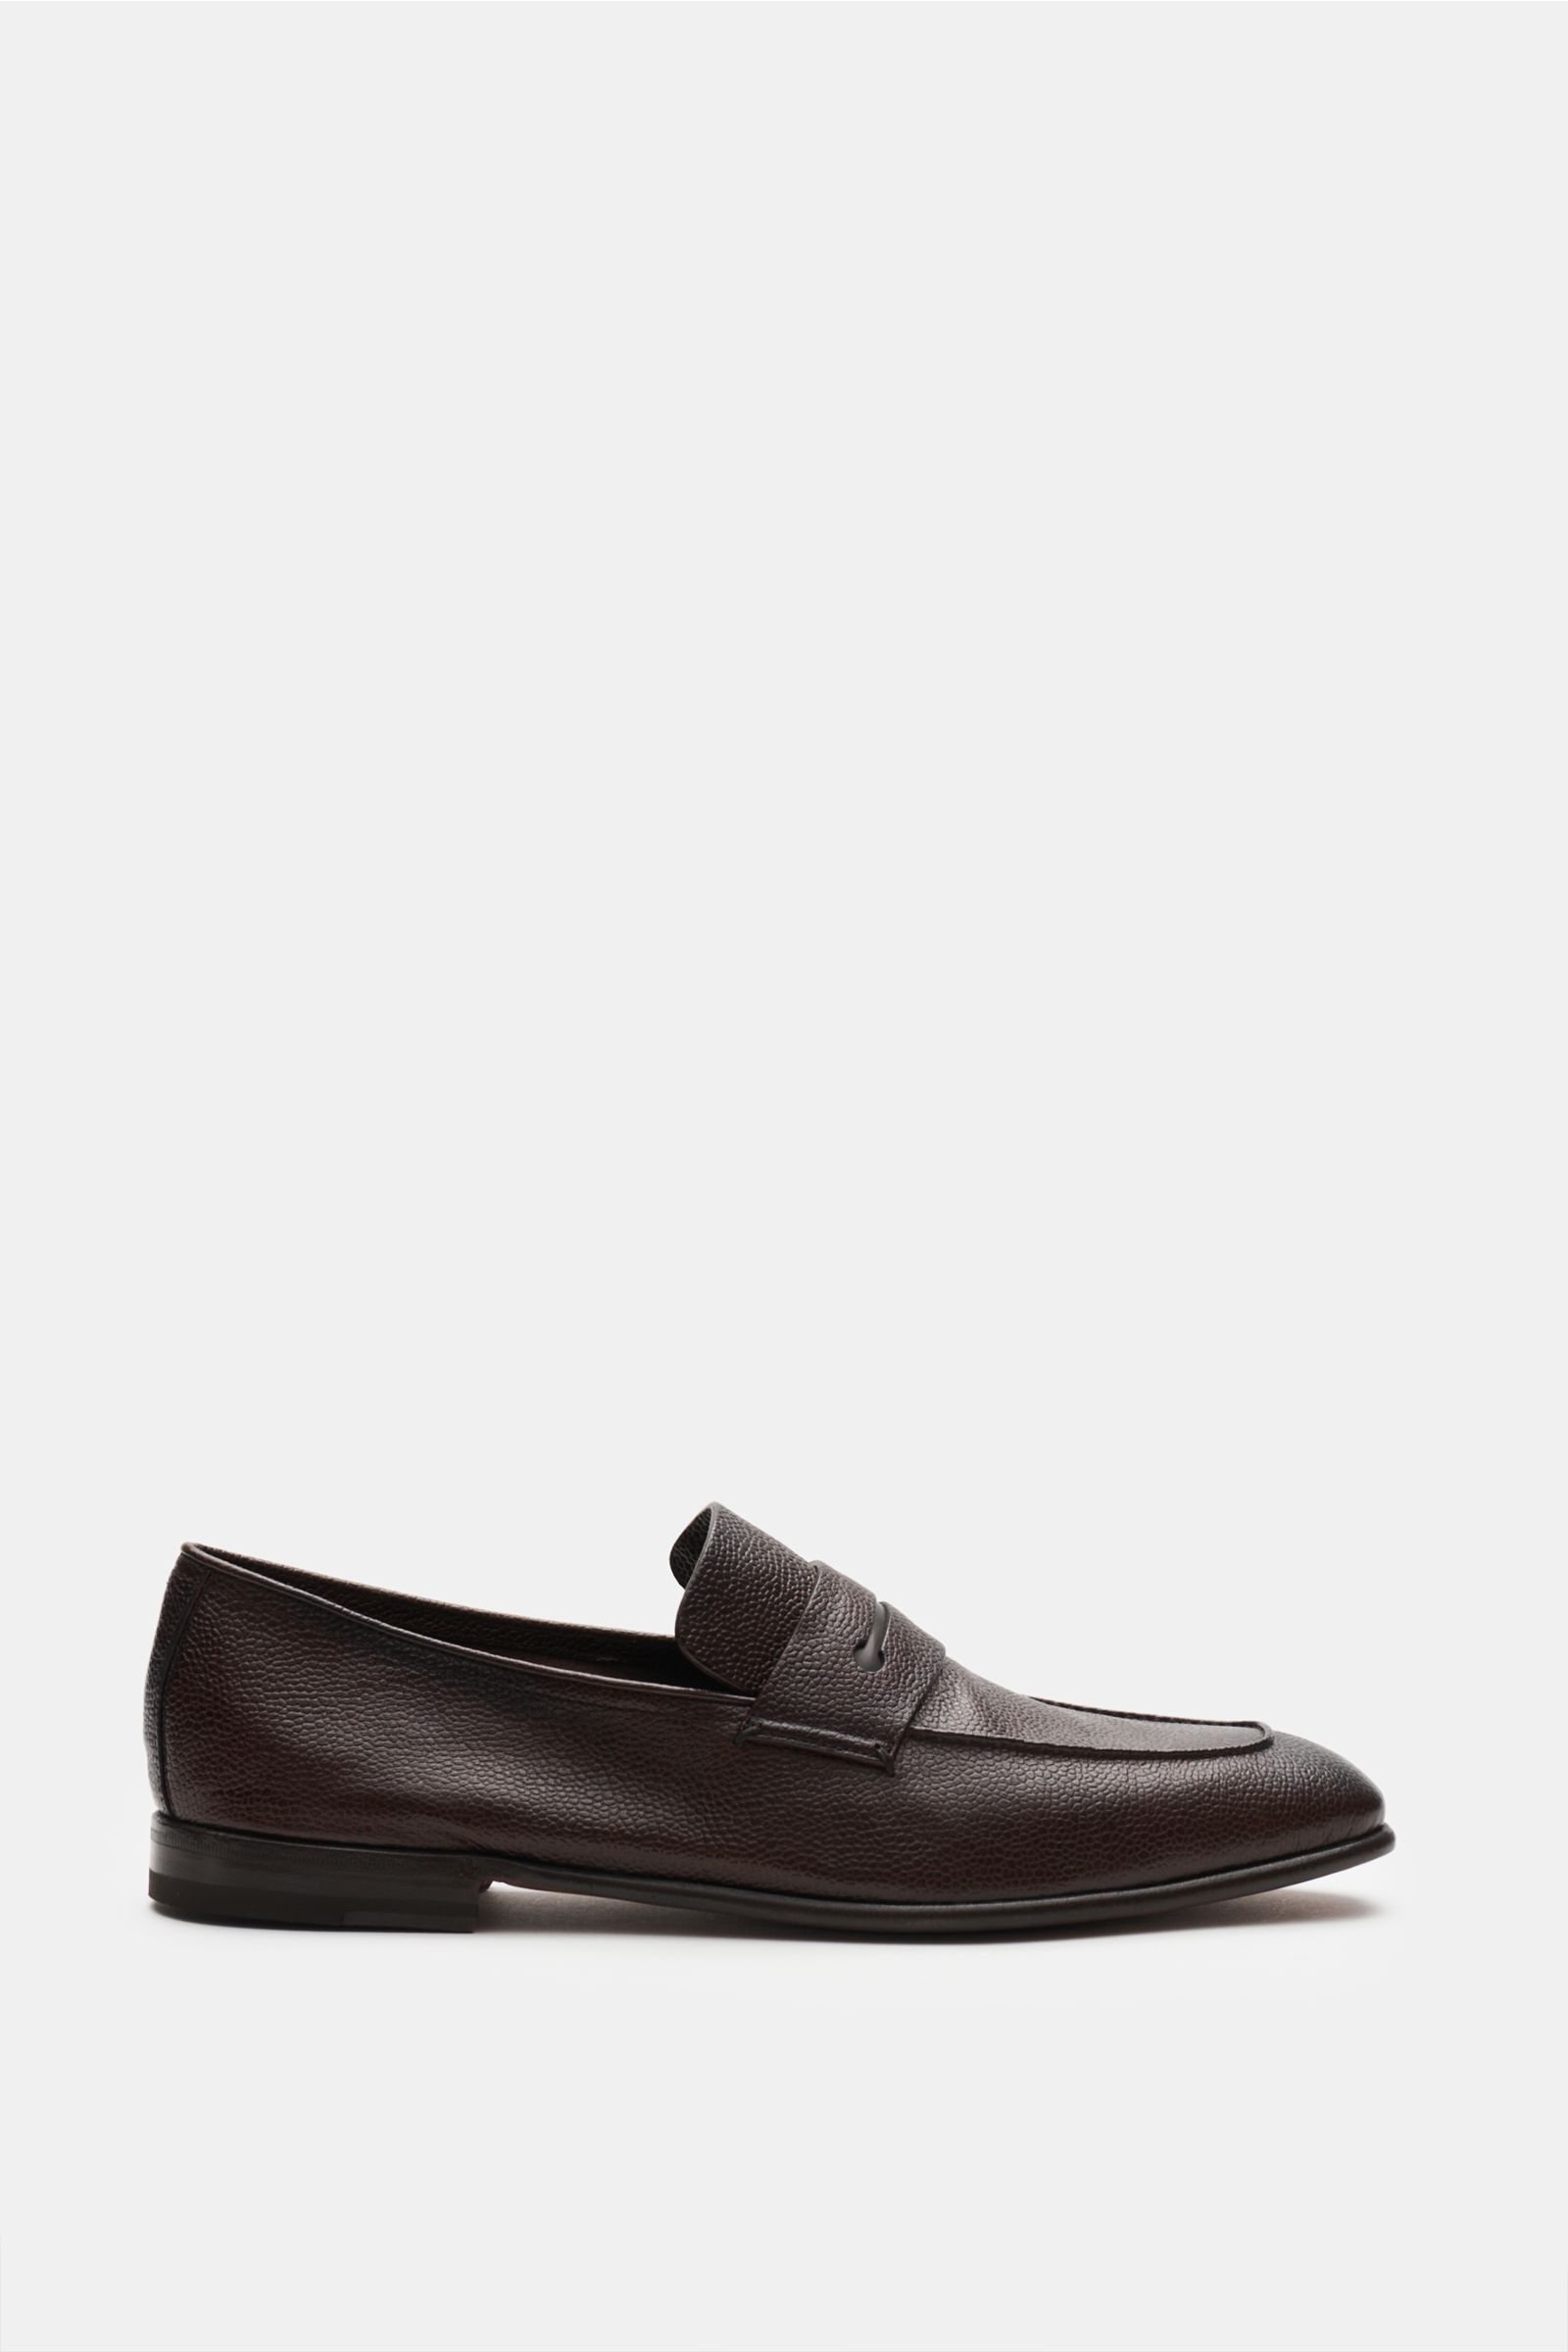 Penny loafers 'L'Asola' dark brown